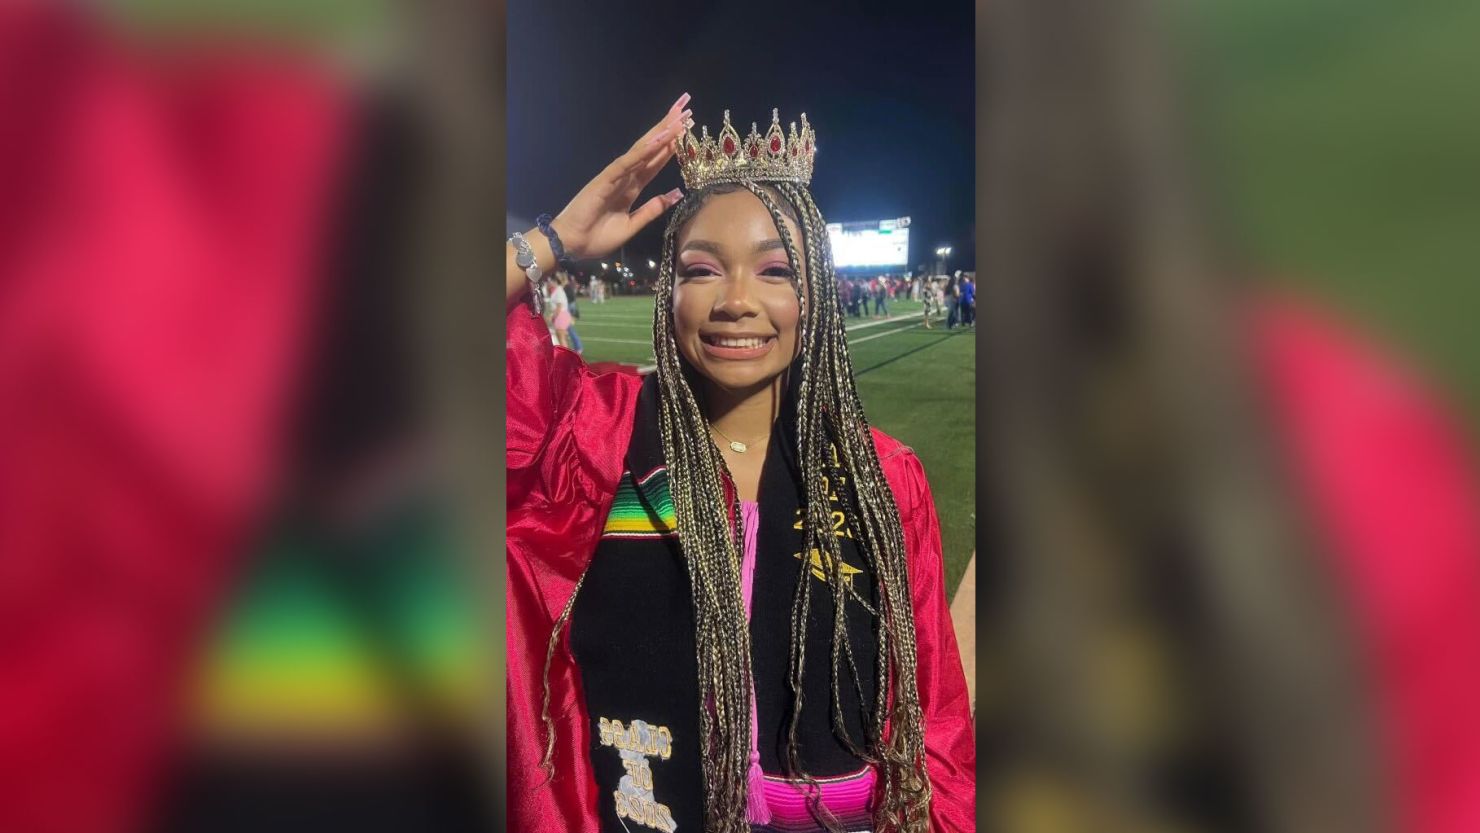 A reigning homecoming queen in Texas wore a Mexican heritage stole